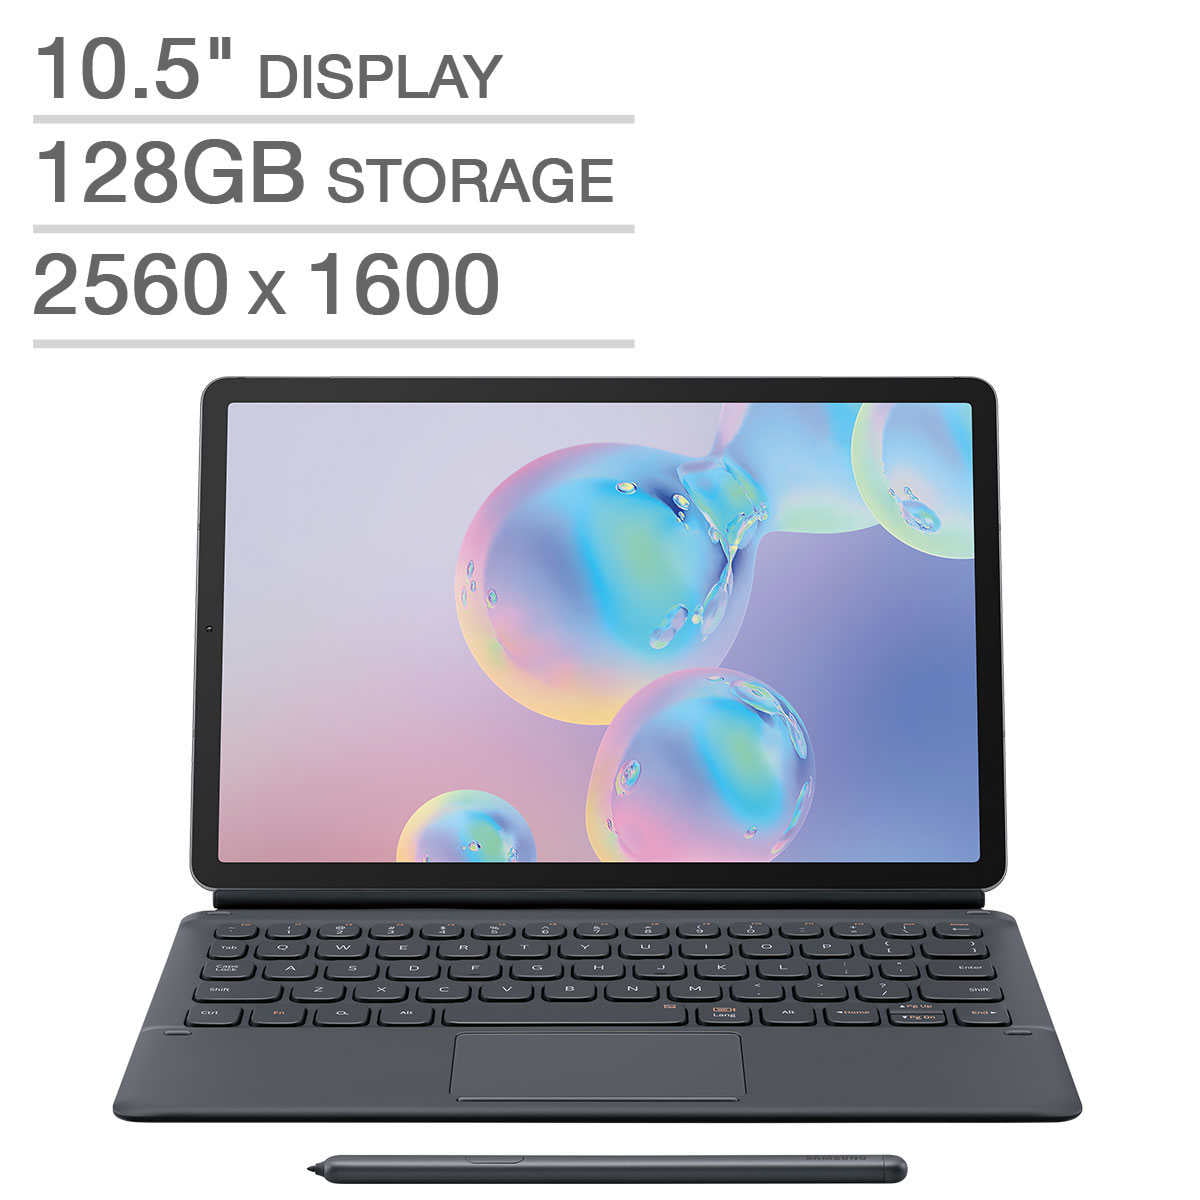 Samsung Galaxy Tab S6 128GB Mountain Gray, Includes Keyboard Cover Tablet SM-T860NZACXAR